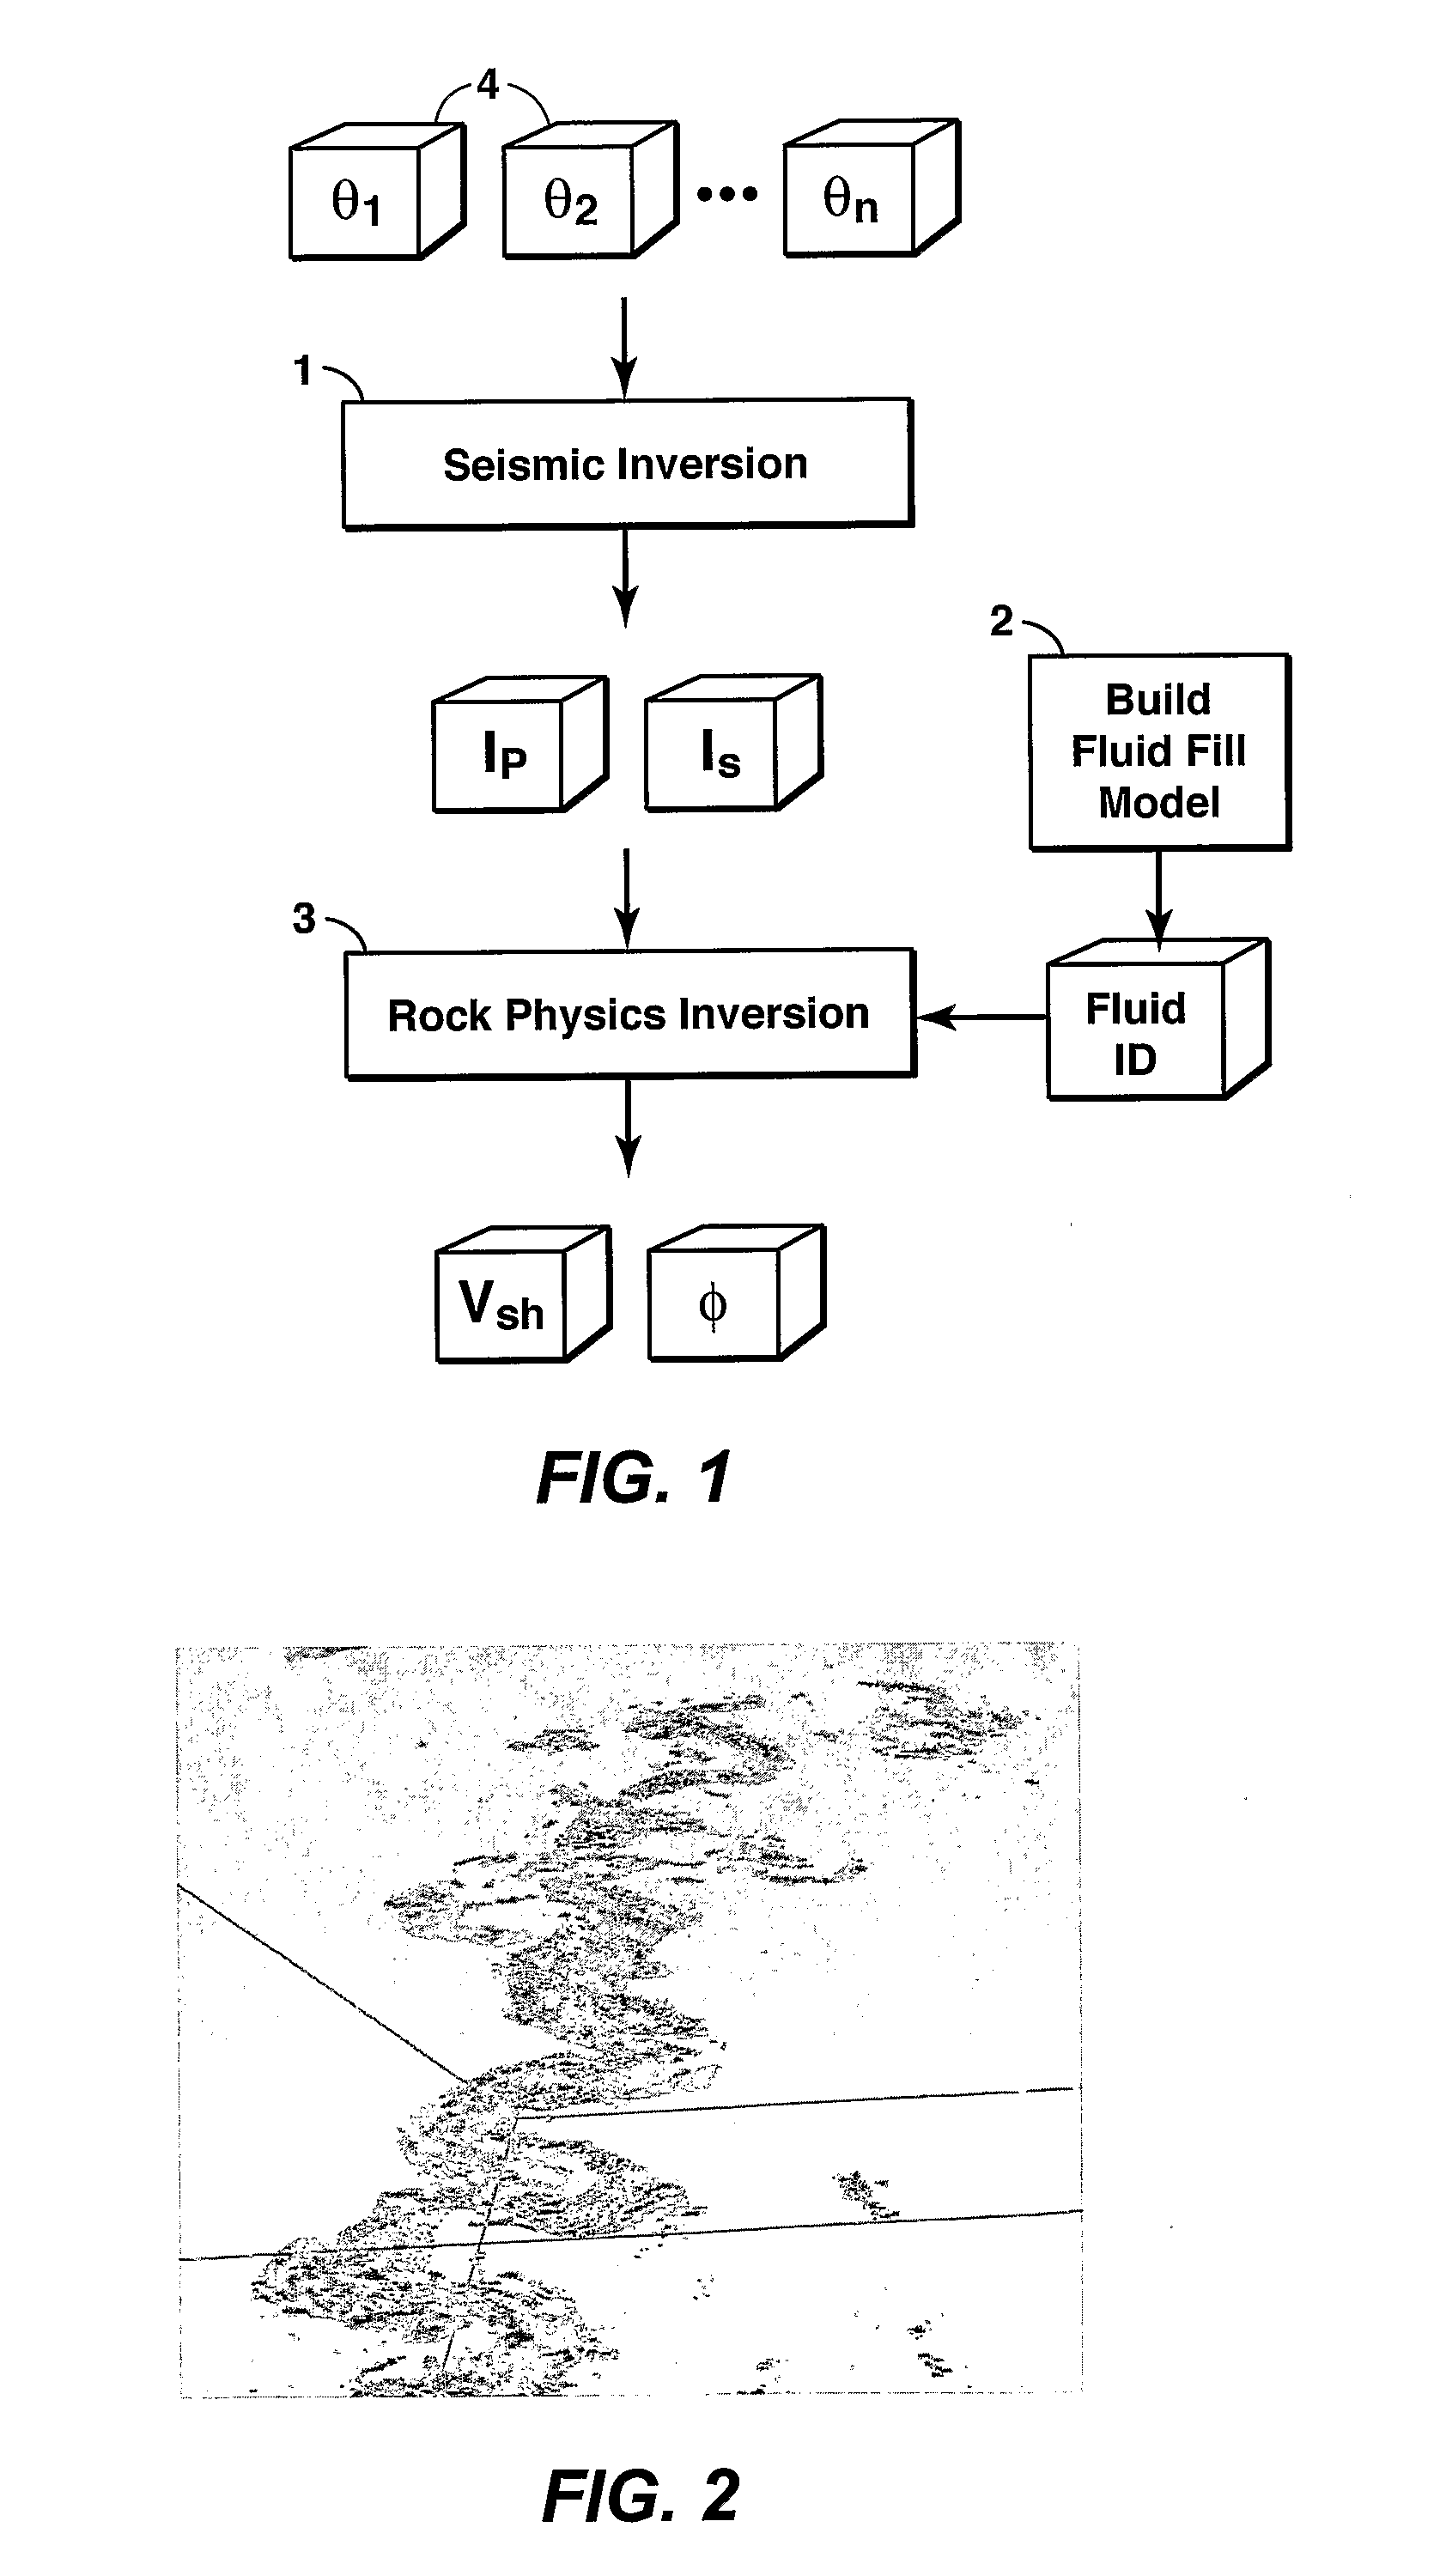 Method For Predicting Lithology And Porosity From Seismic Reflection Data